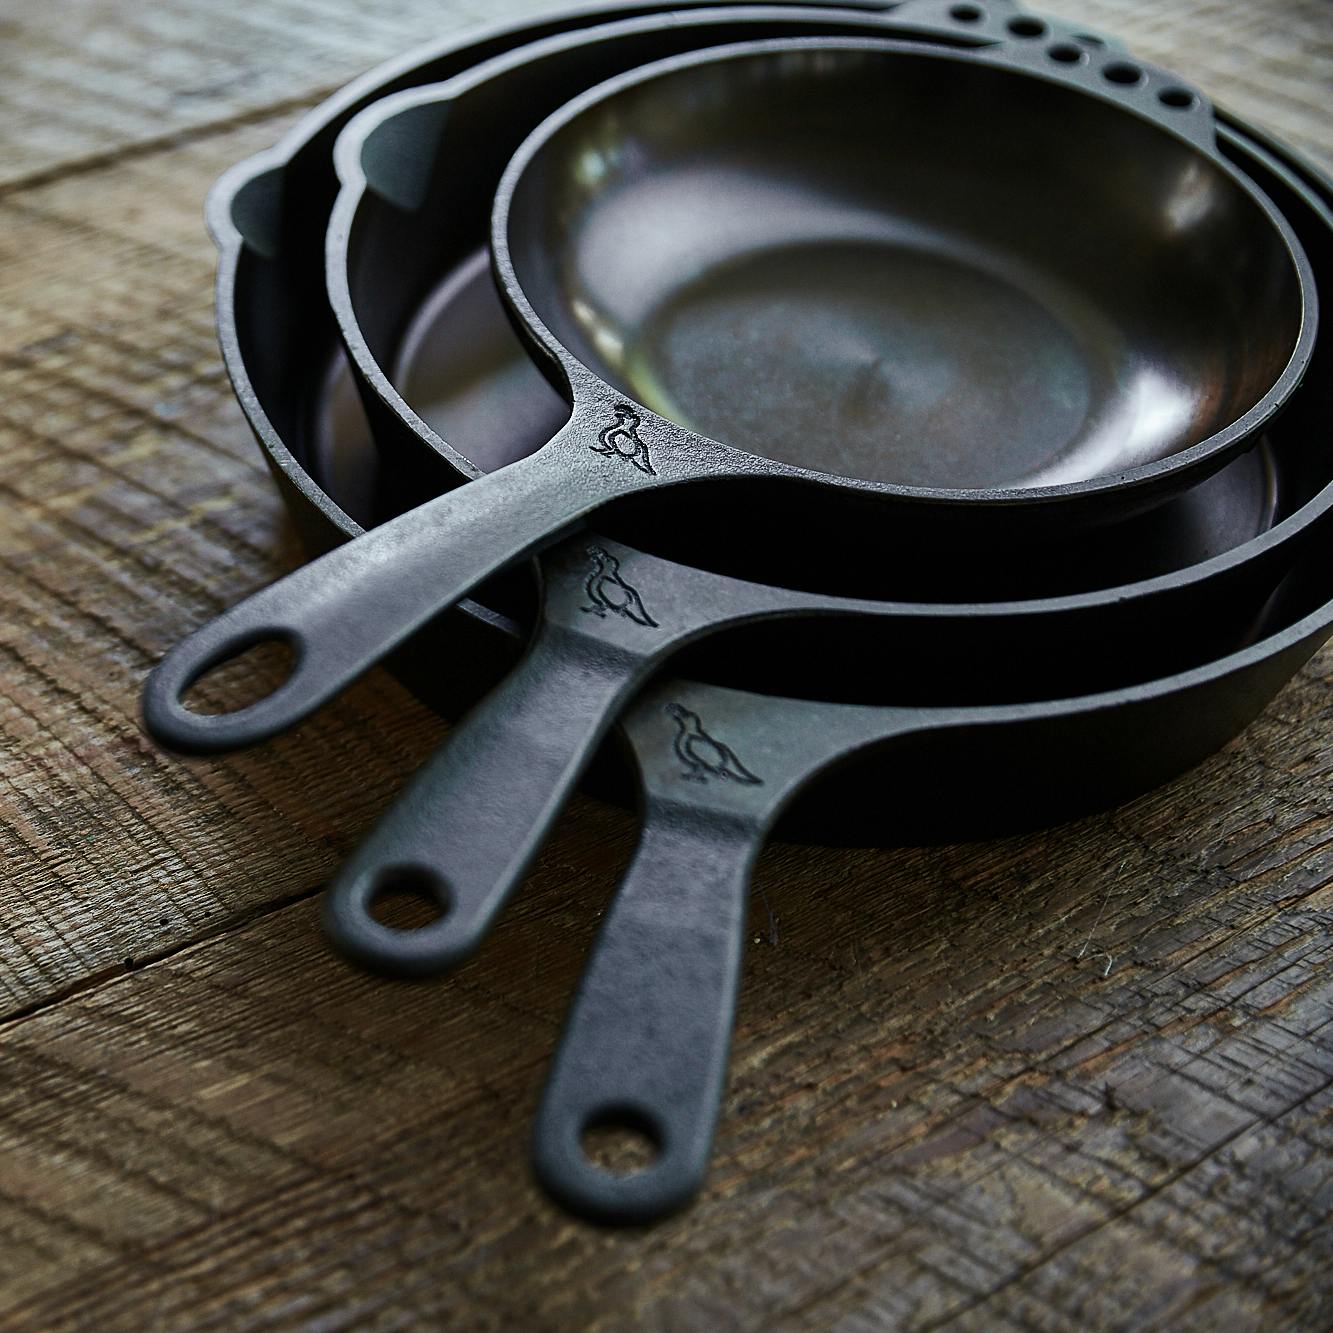 https://huckberry.imgix.net/spree/products/590721/original/BUnmmVGhzA_smithey-ironware-co_no._12_cast_iron_skillet_for-the-home-chef_7_original.jpg?auto=format%2C%20compress&crop=top&fit=clip&cs=tinysrgb&ixlib=react-9.5.2